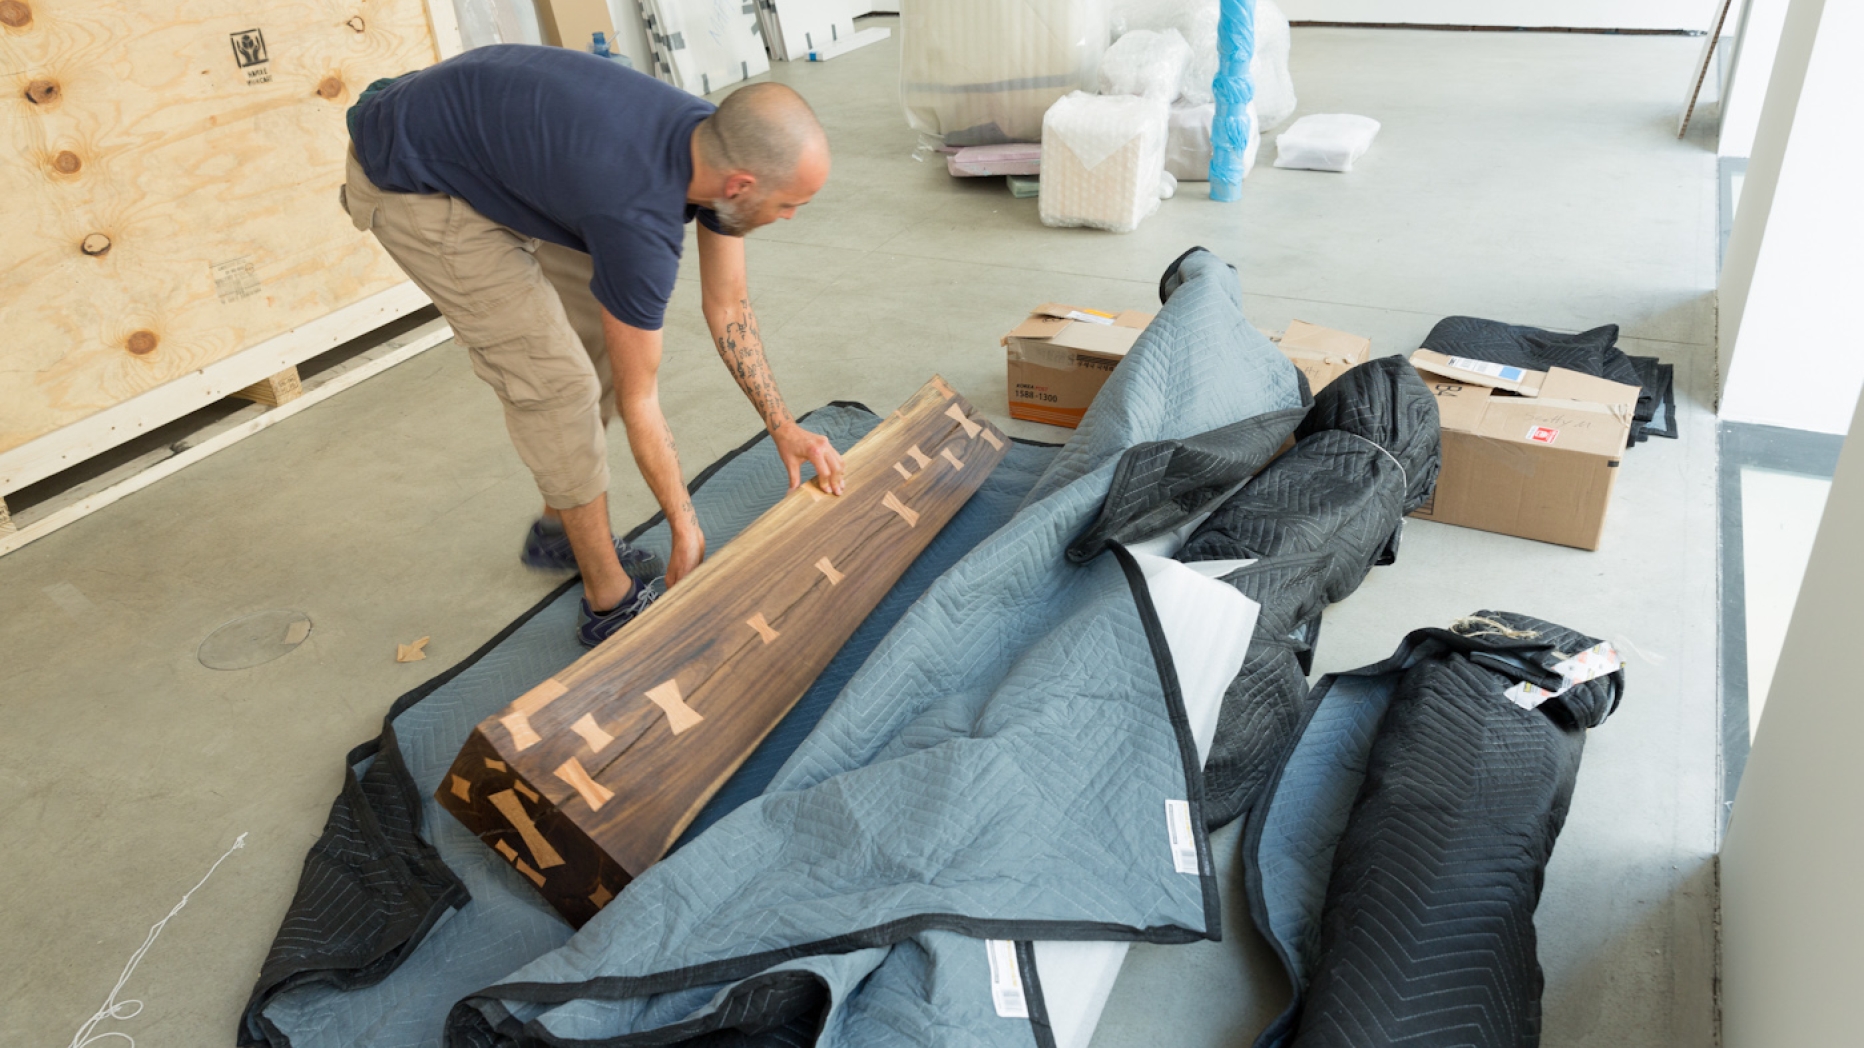 Man taking a large wooden sculpture out of transport packaging.